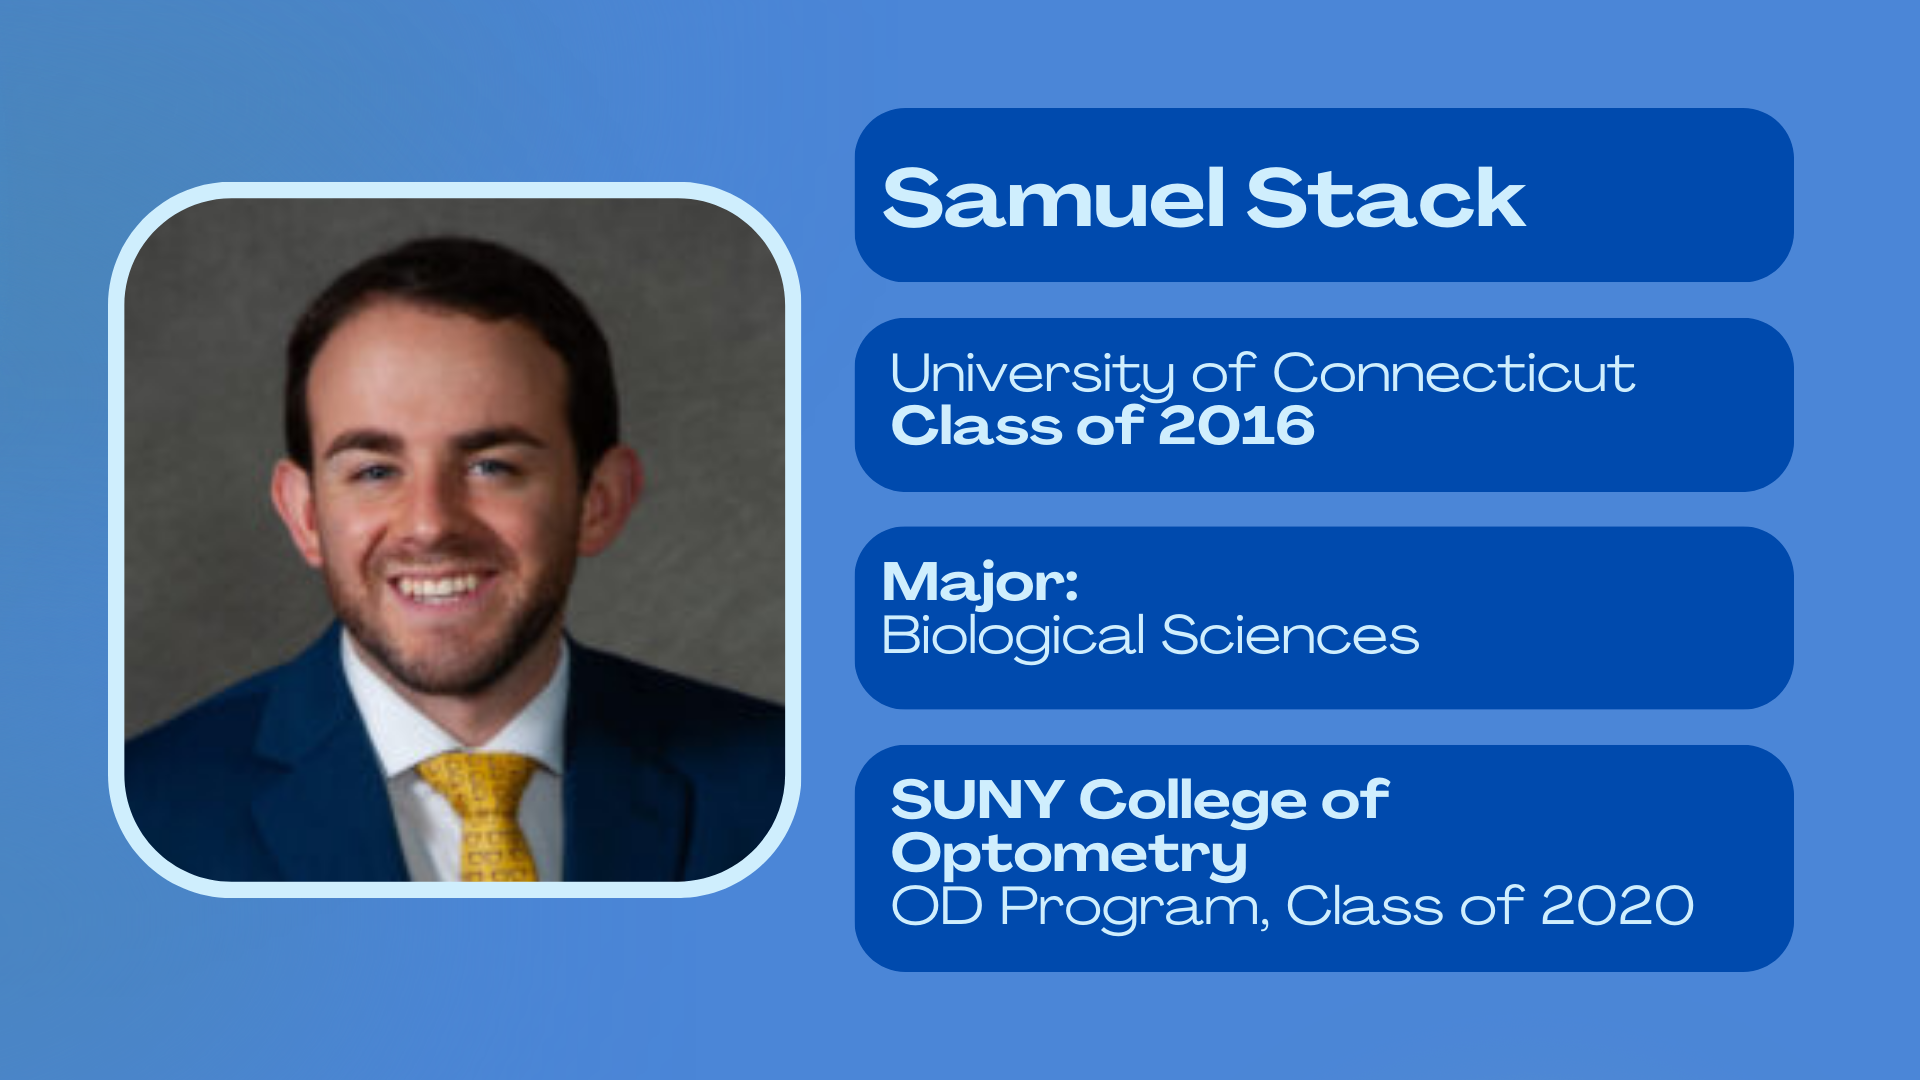 Samuel Stack; University of Connecticut class of 2016; Major: biological sciences; SUNY College of Optometry OD program class of 2020